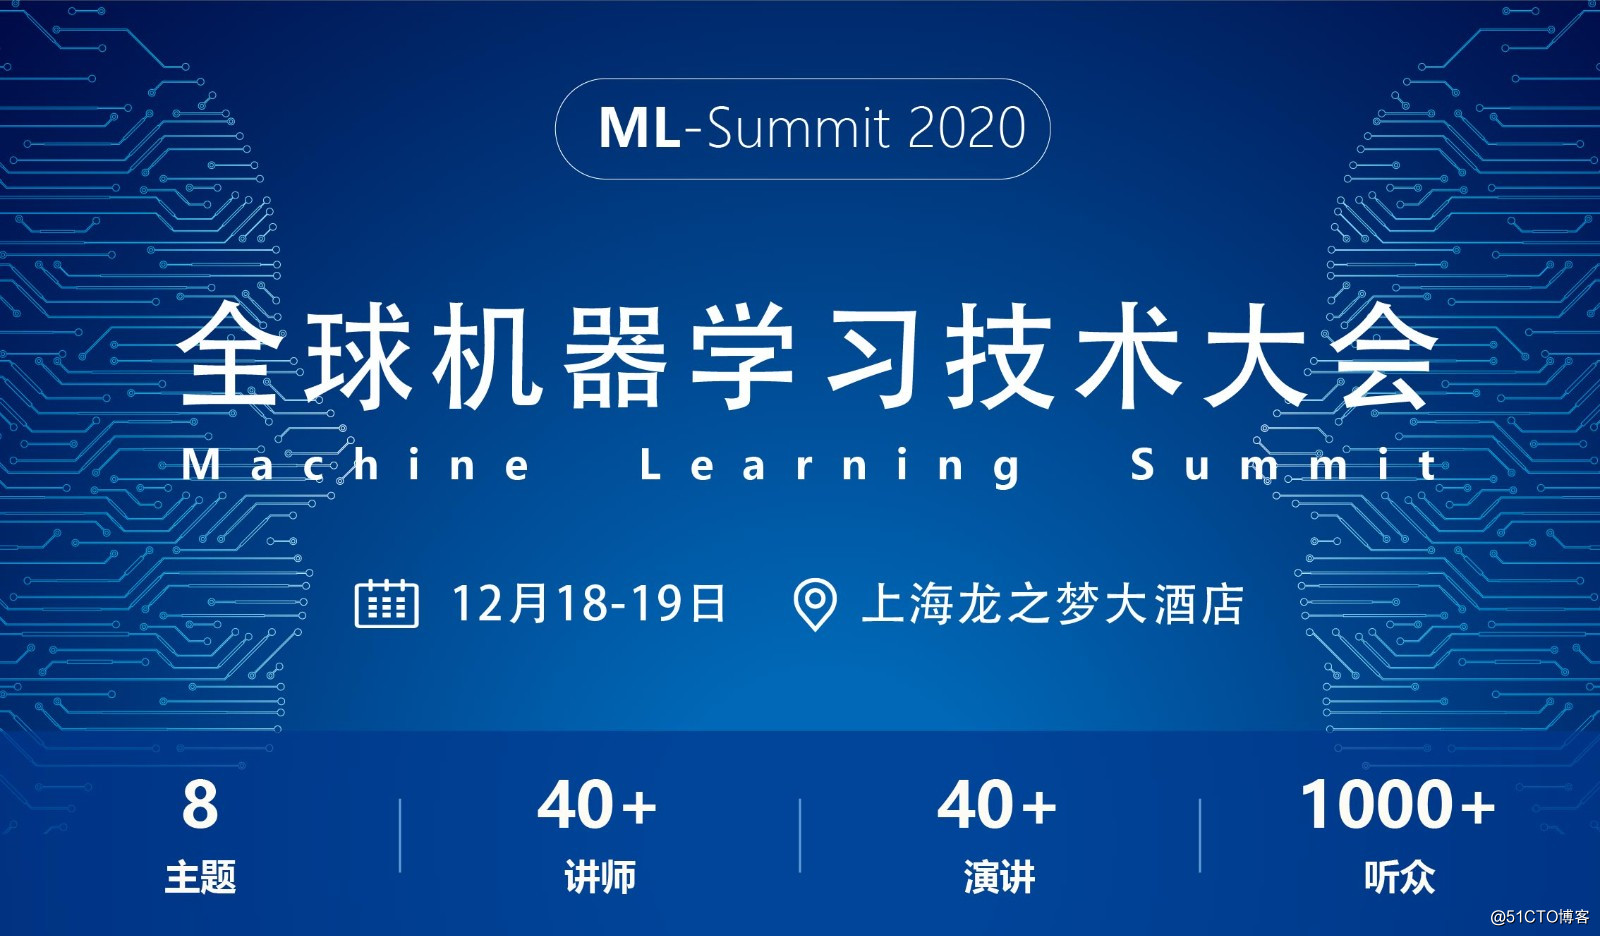 The 2020 Global Machine Learning Technology Conference will be held in Shanghai on December 18-19!